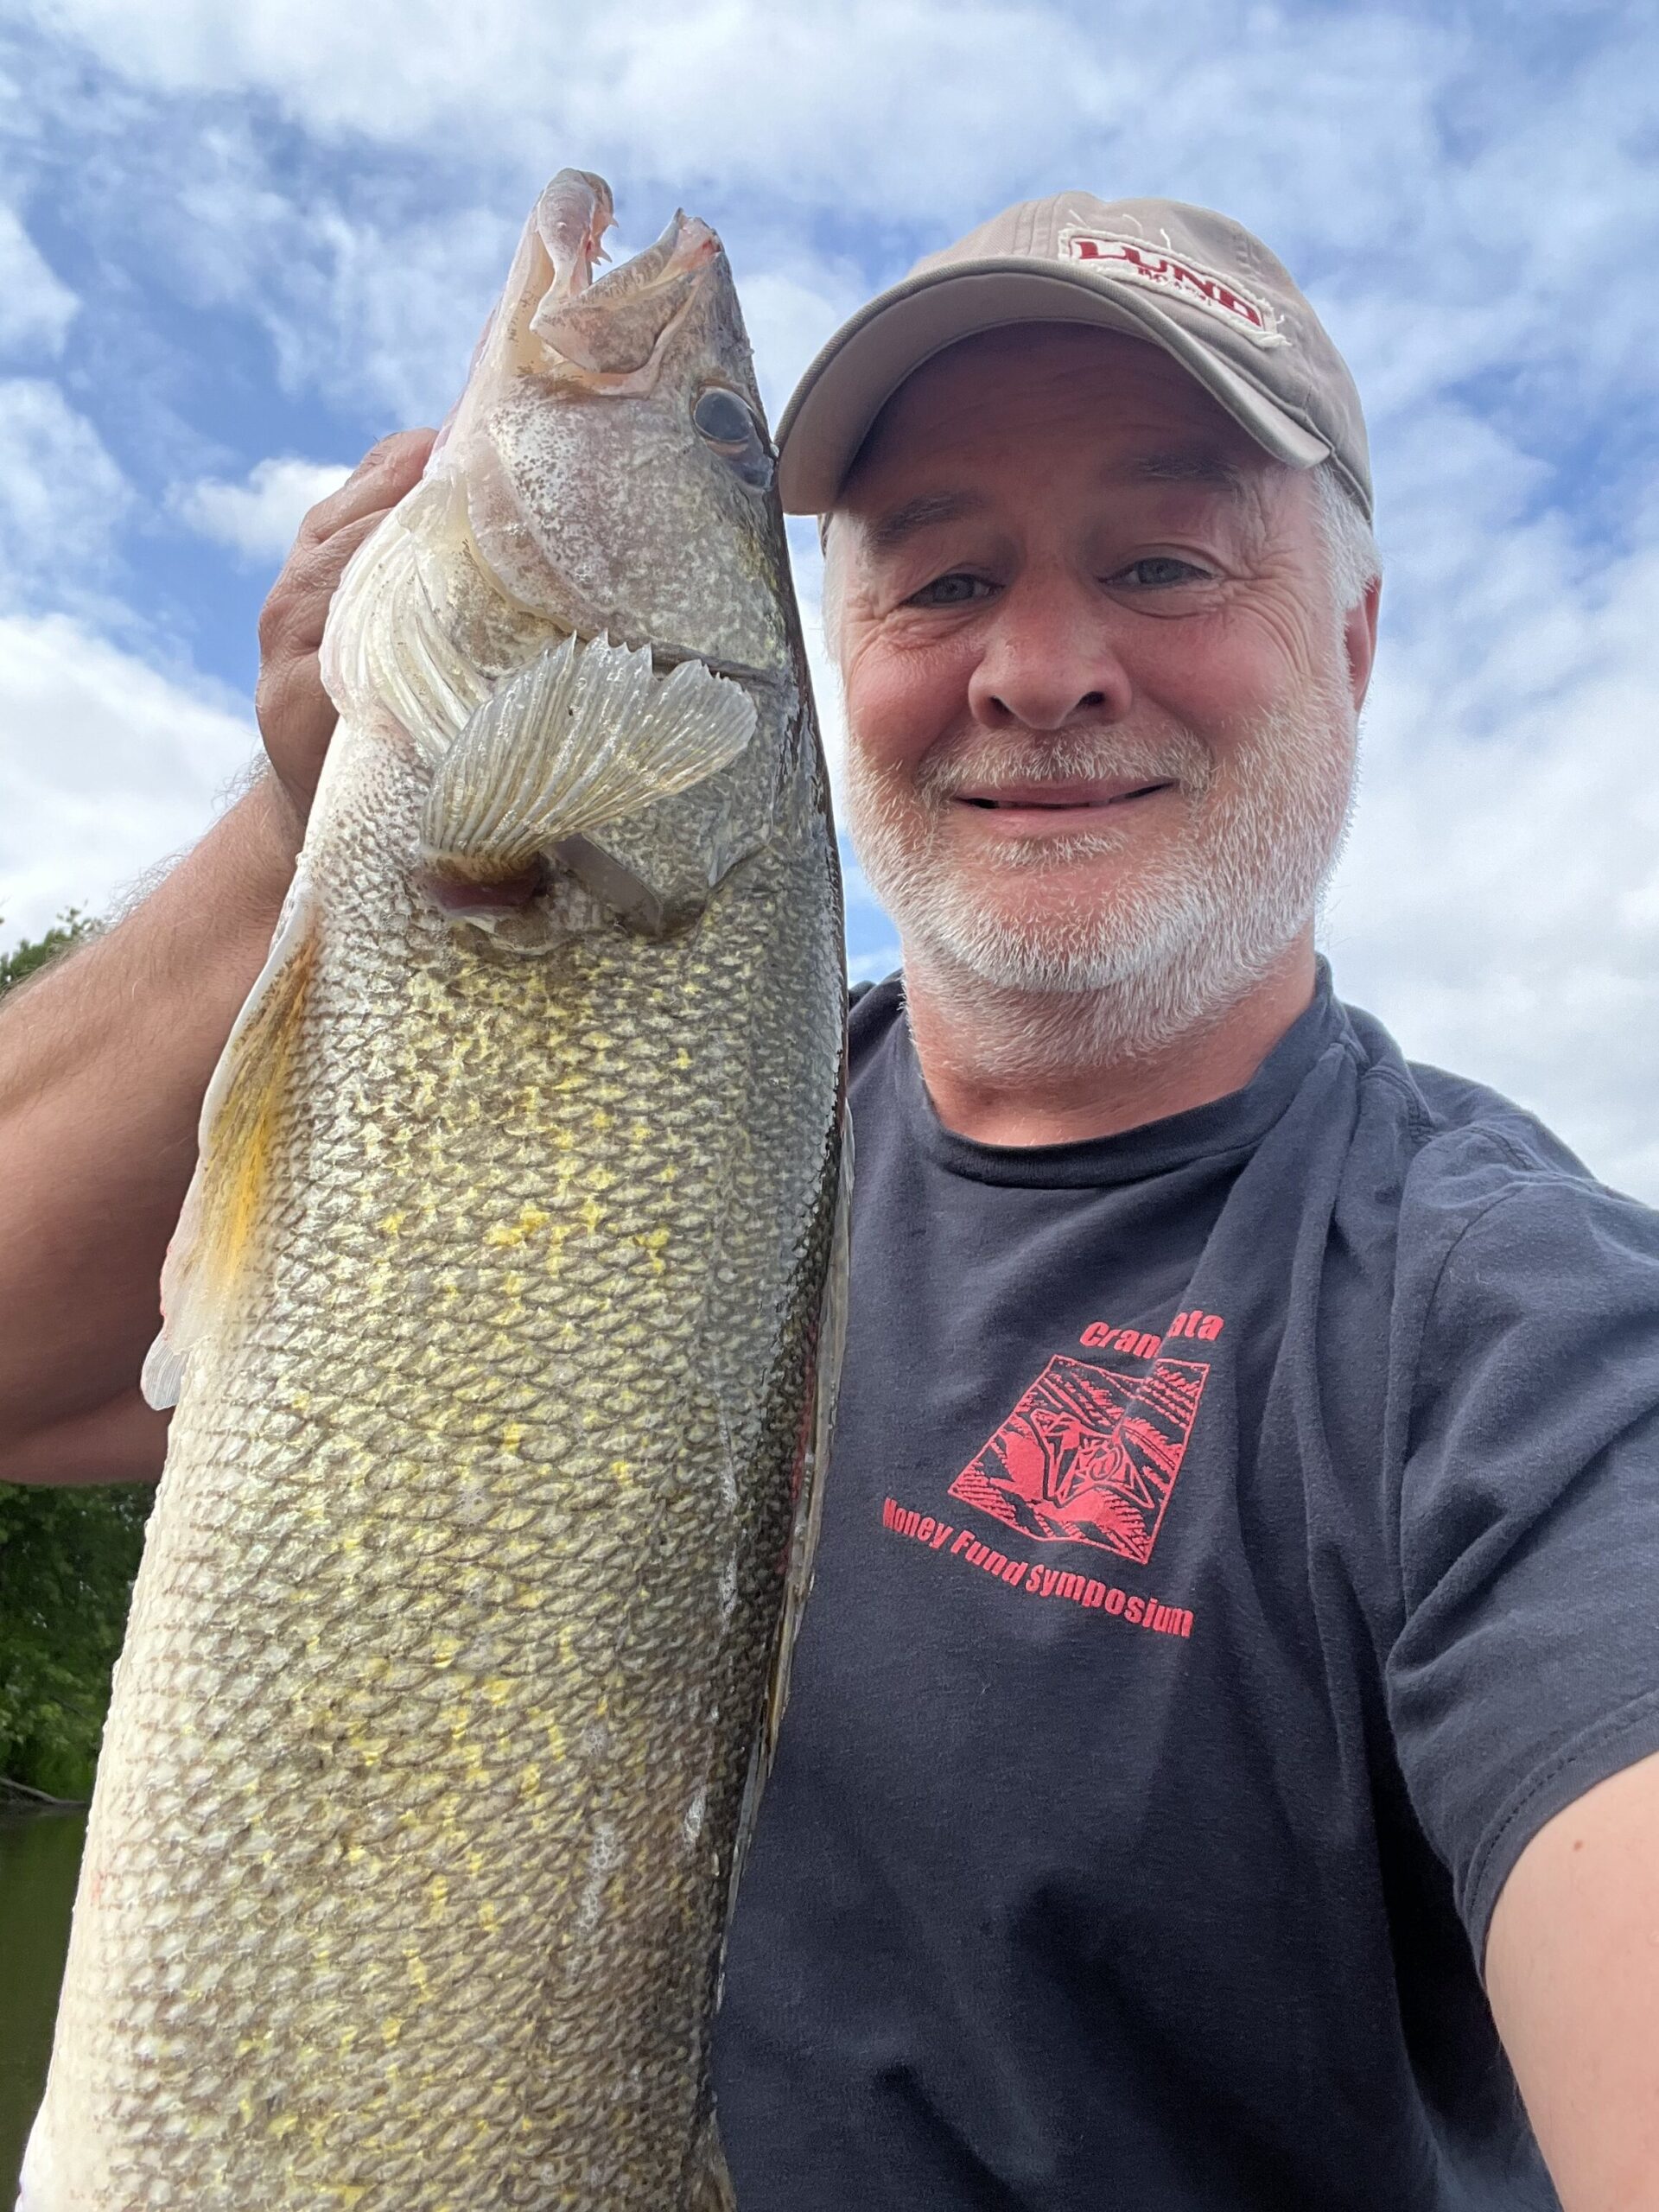 Pool 8 Mississippi River Fishing Report for Largemouth Bass(May 28